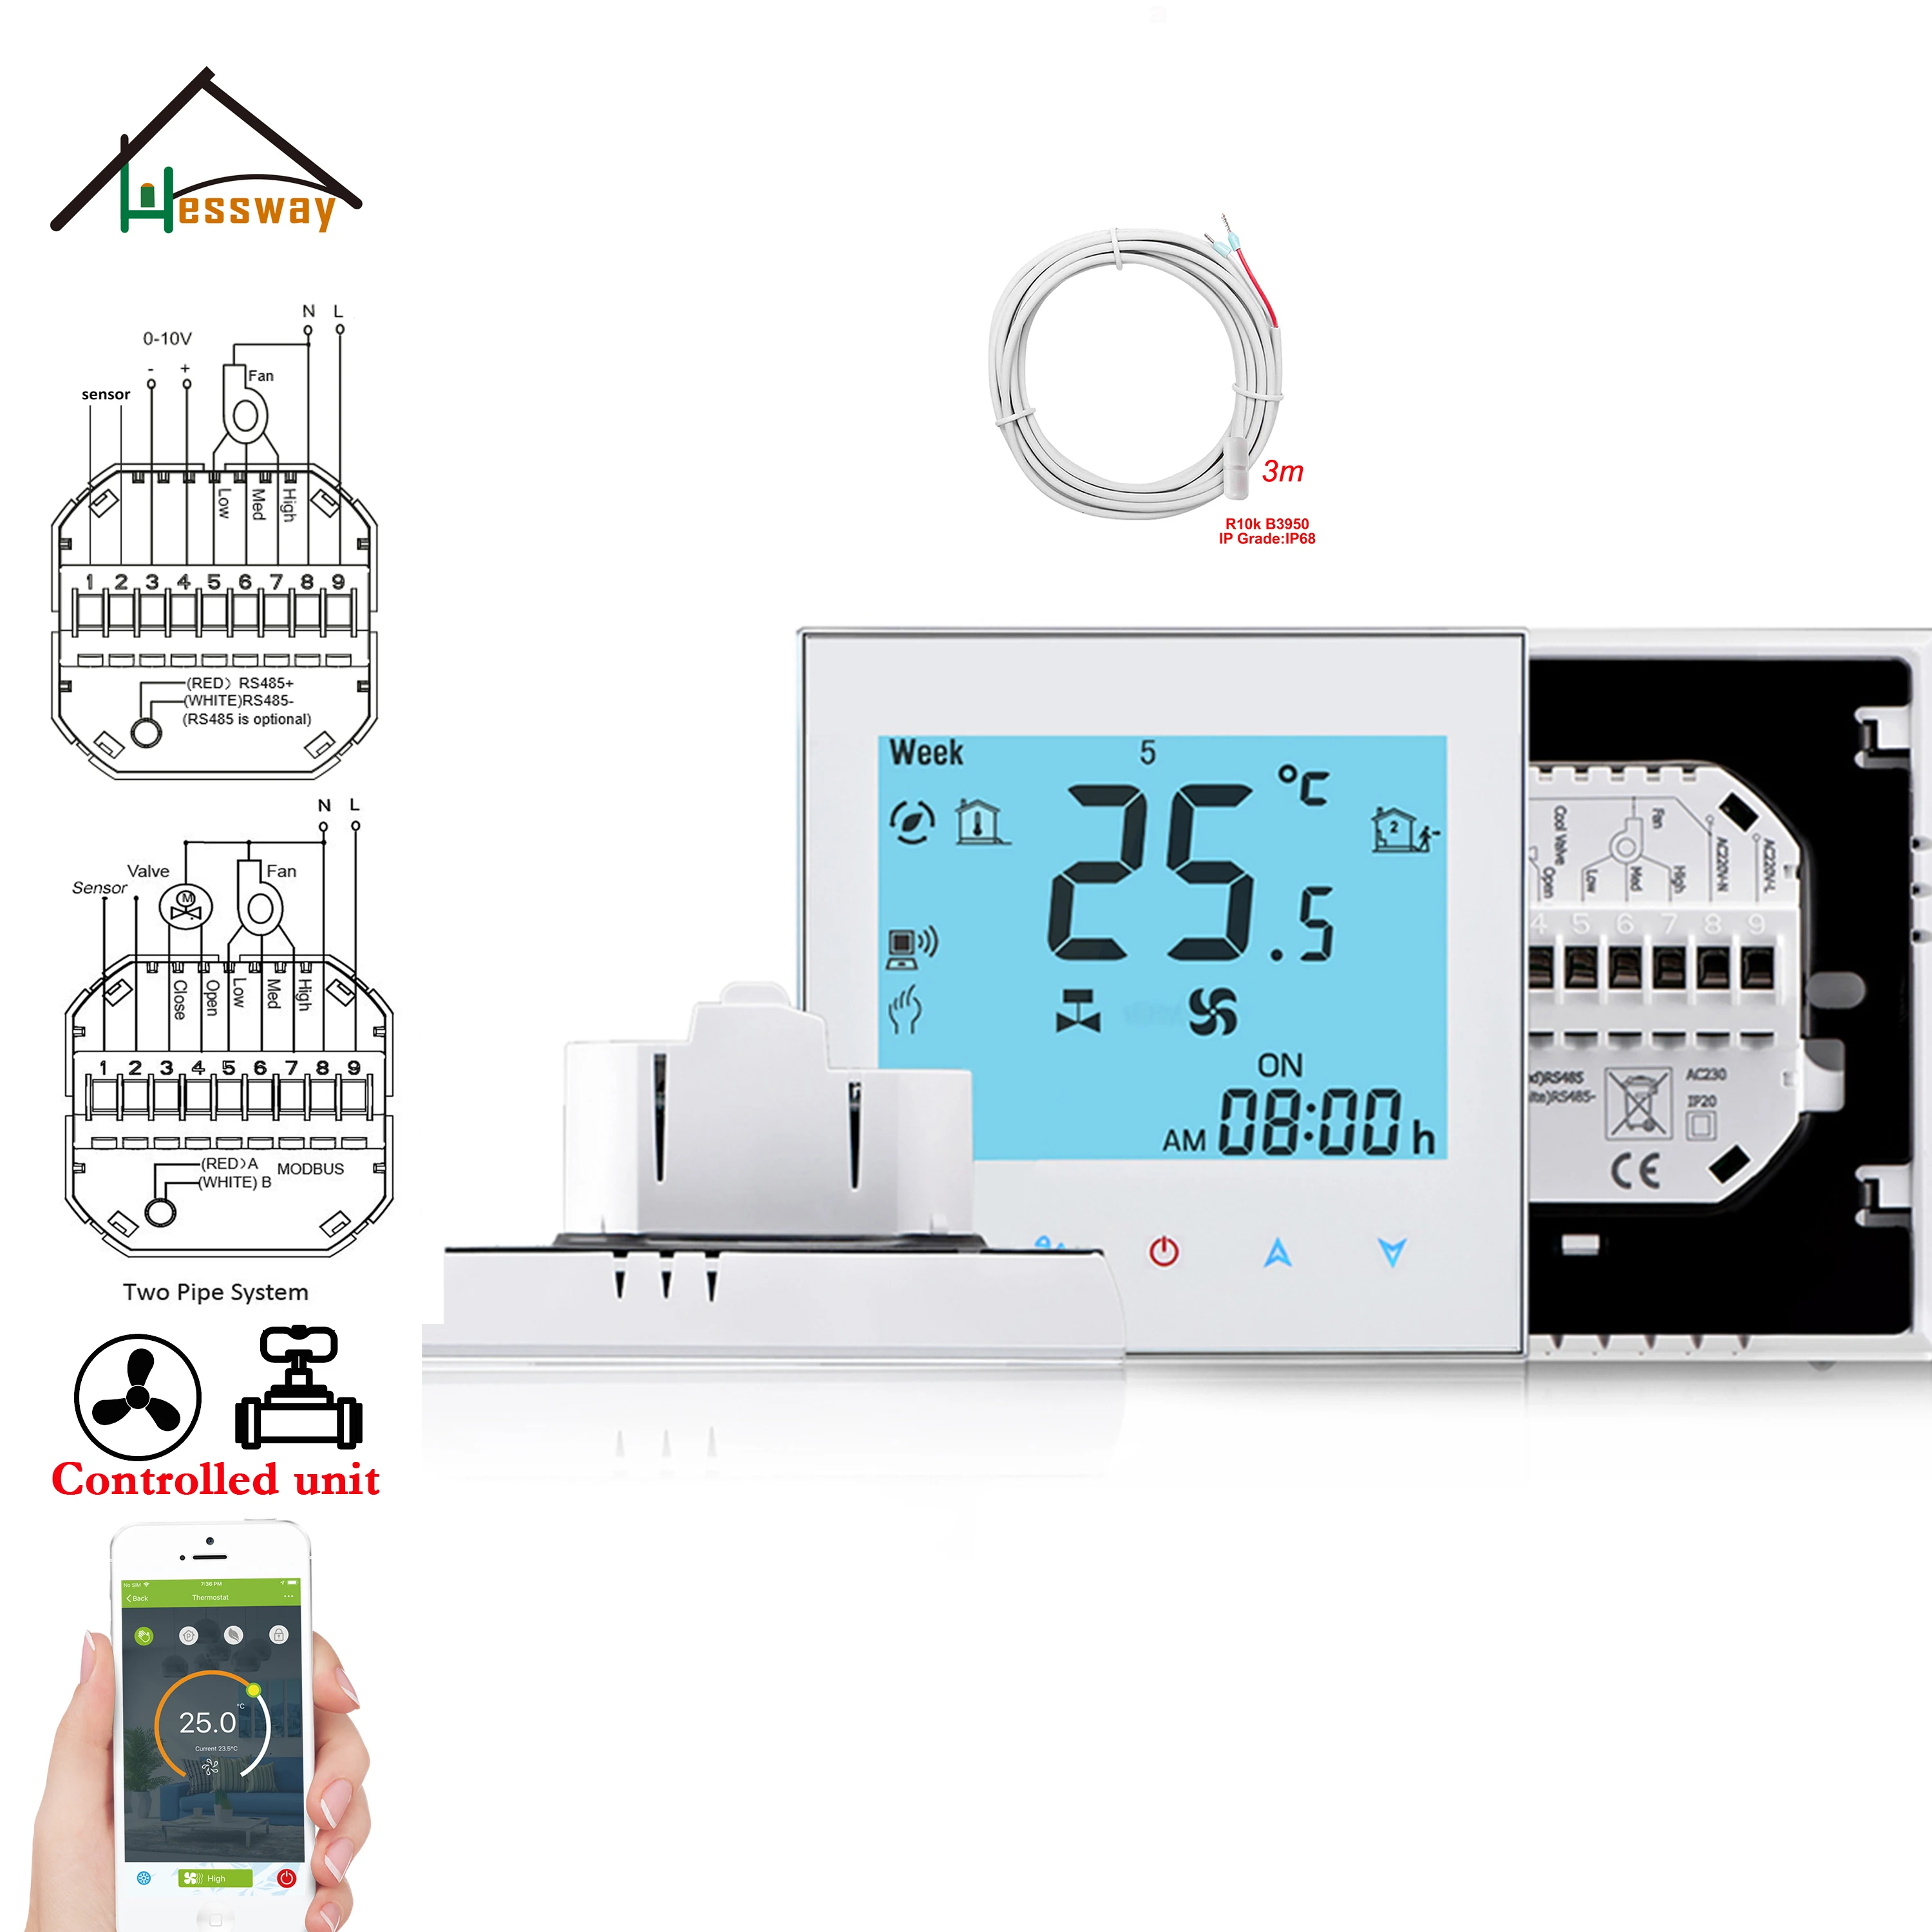 HESSWAY WIFI Dual SensorTemperature Control Unit for Greenhouse Thermostat  0-10V/AC Valve 3Speed Heater Cooler Smart Life Google - AliExpress